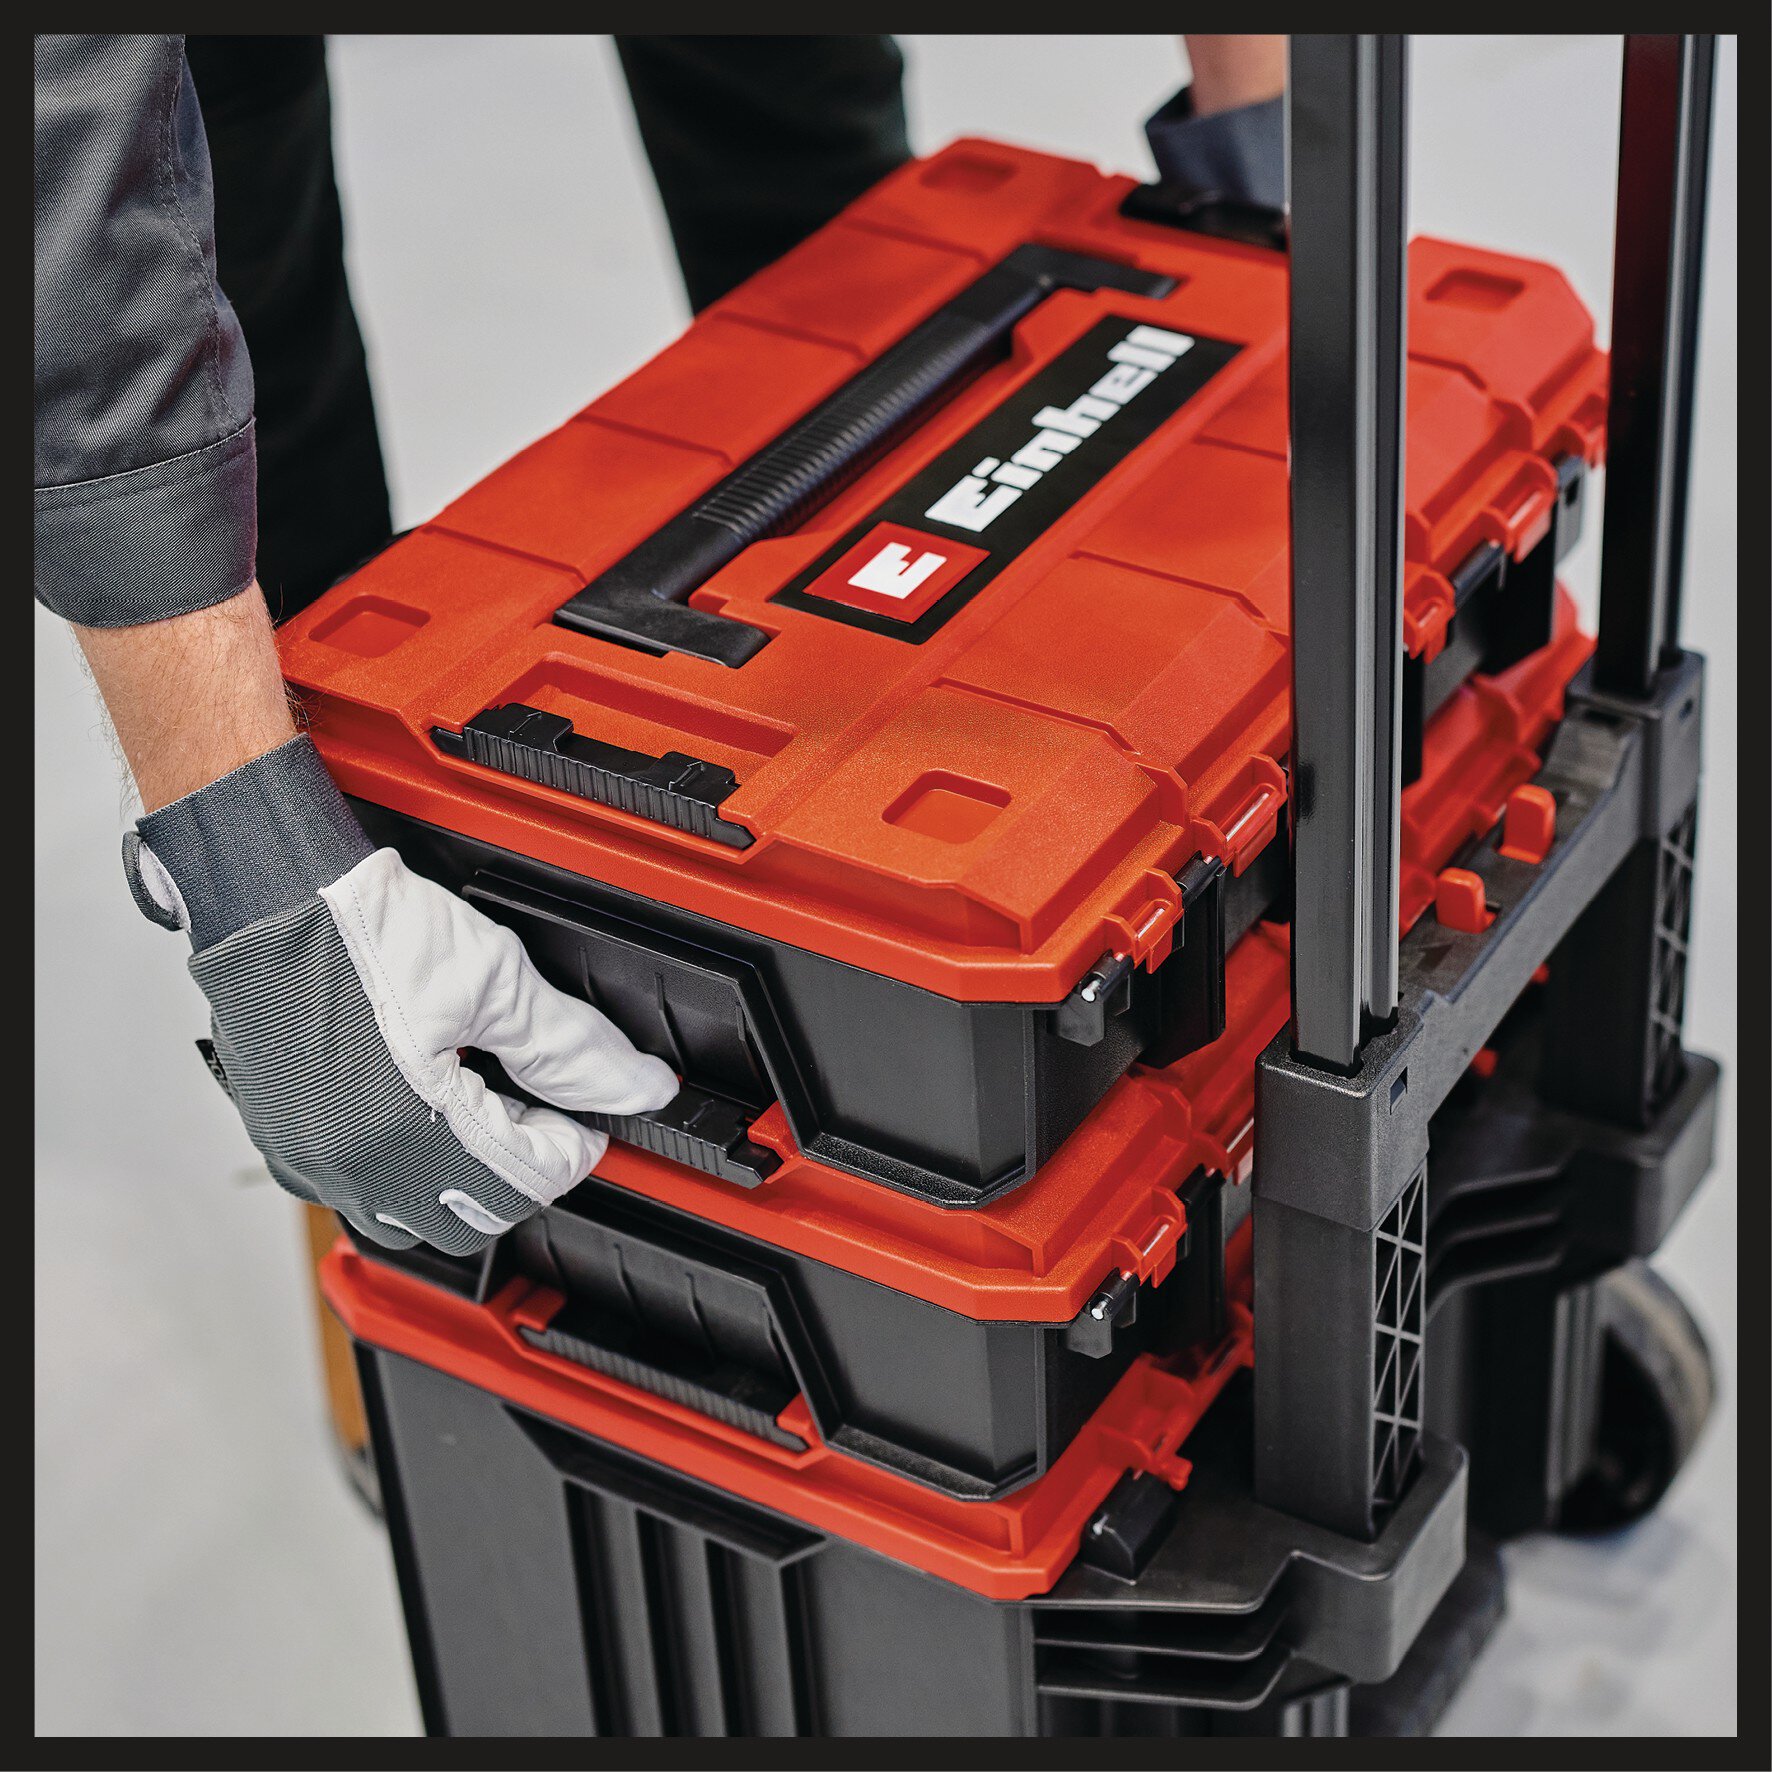 einhell-accessory-system-carrying-case-4540014-detail_image-101